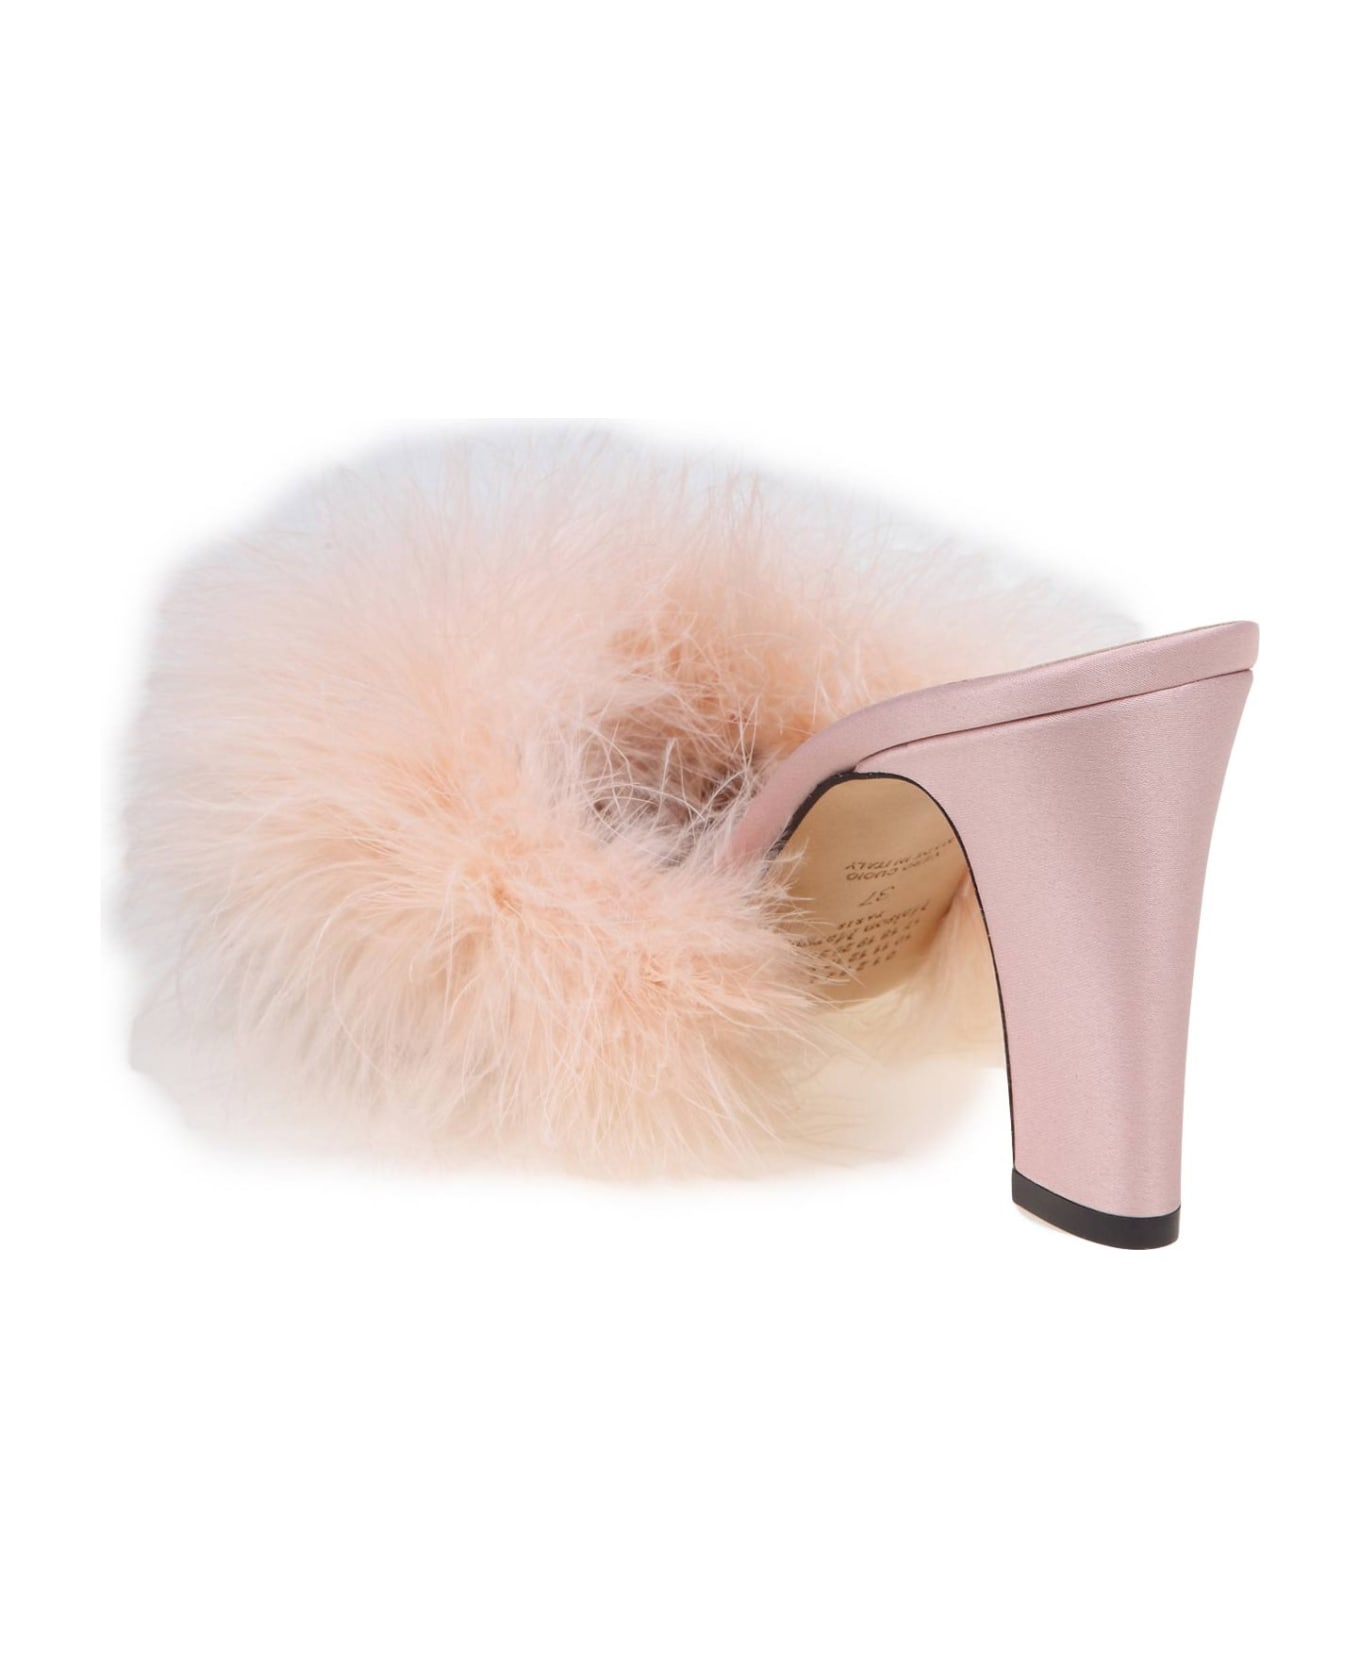 Maison Margiela Mules With Feathers - PINK